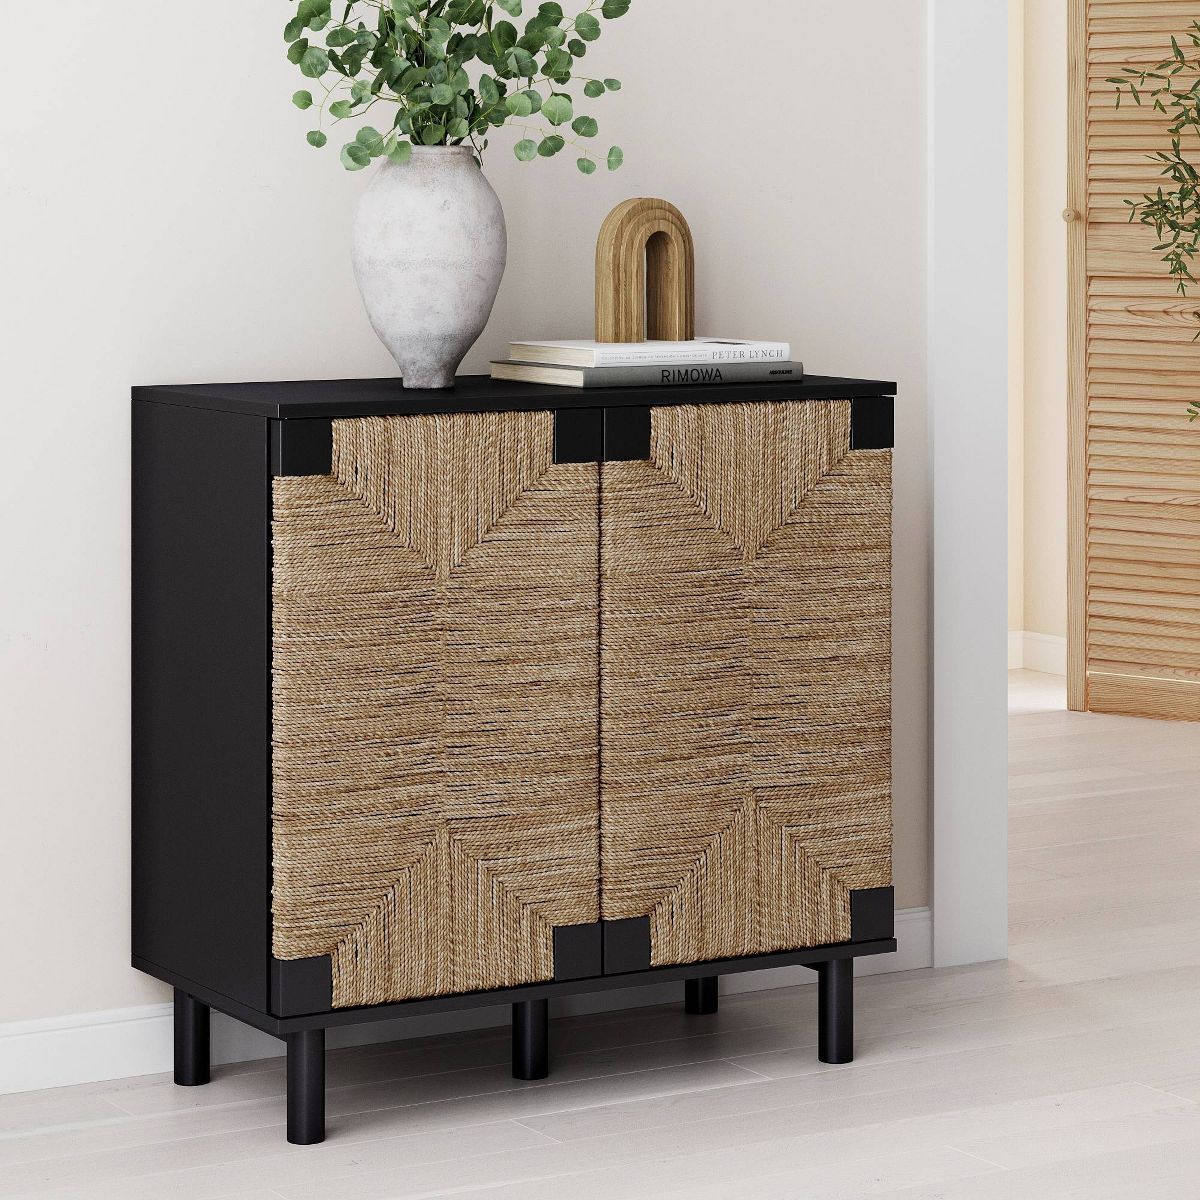 Beacon Wood and Seagrass 2 Door Storage Cabinet - Nathan James | Target